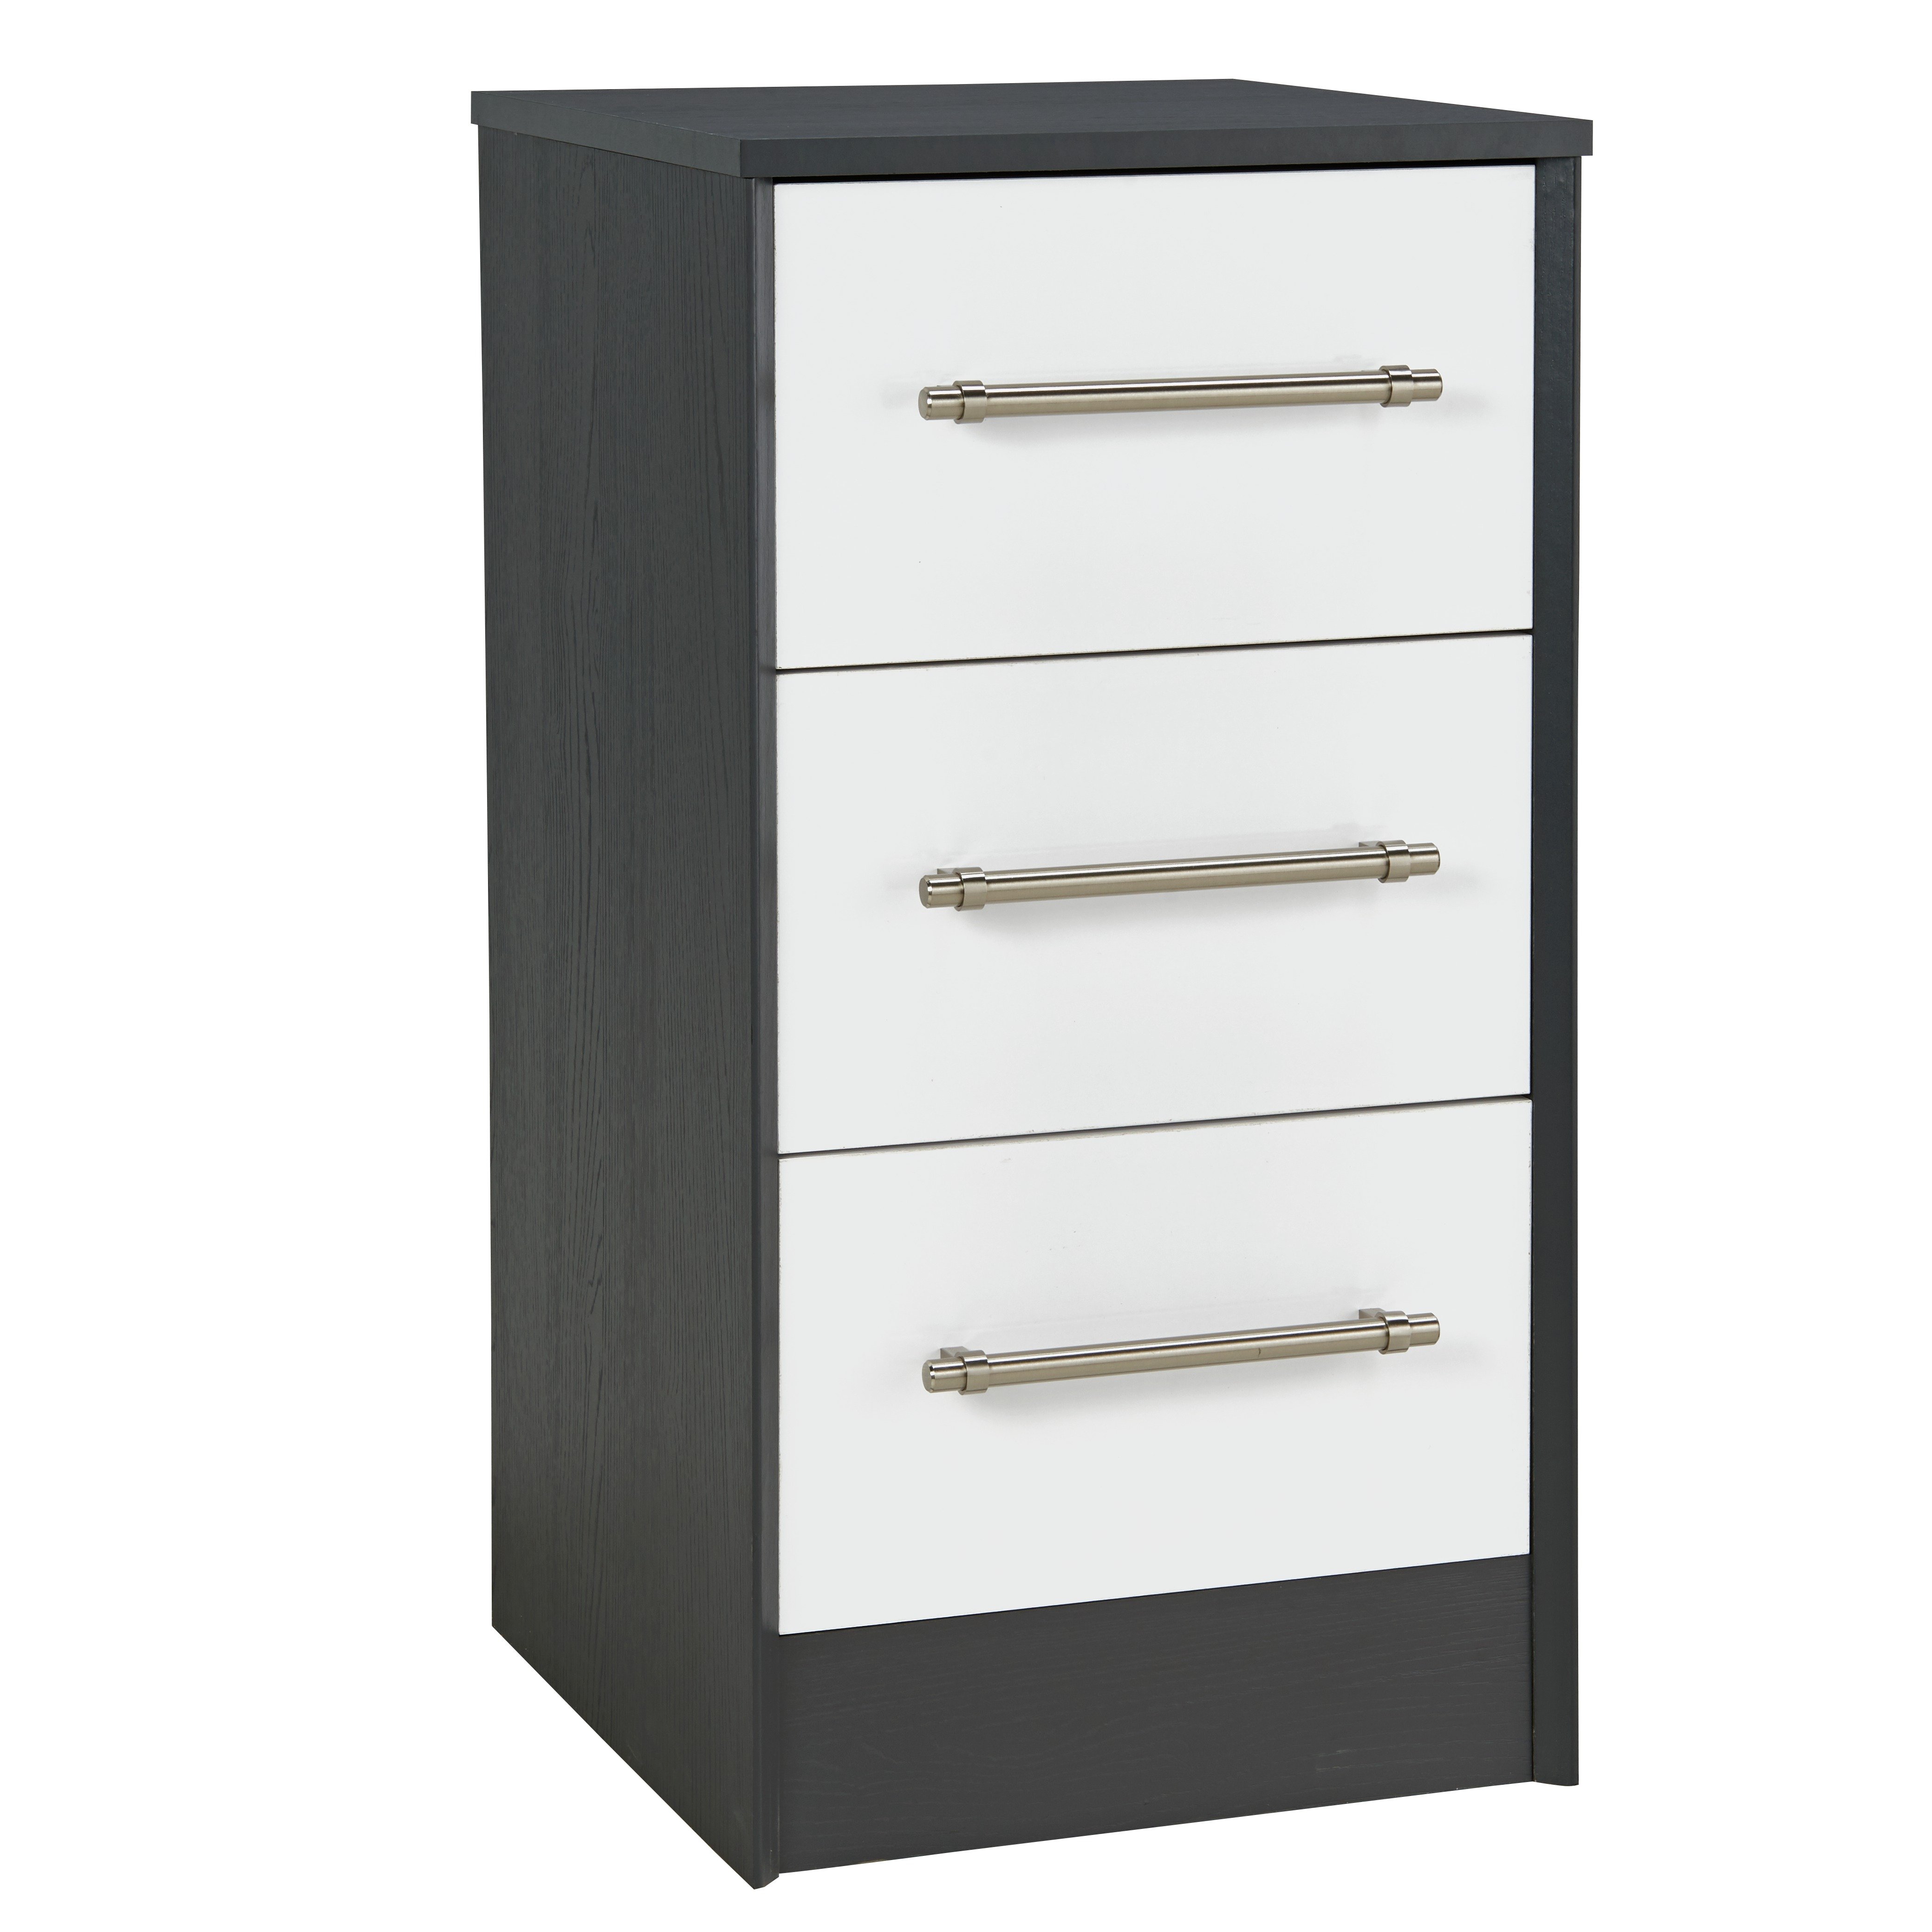 Victoria 3 Drawer Bedside Table - Graphite and White Gloss